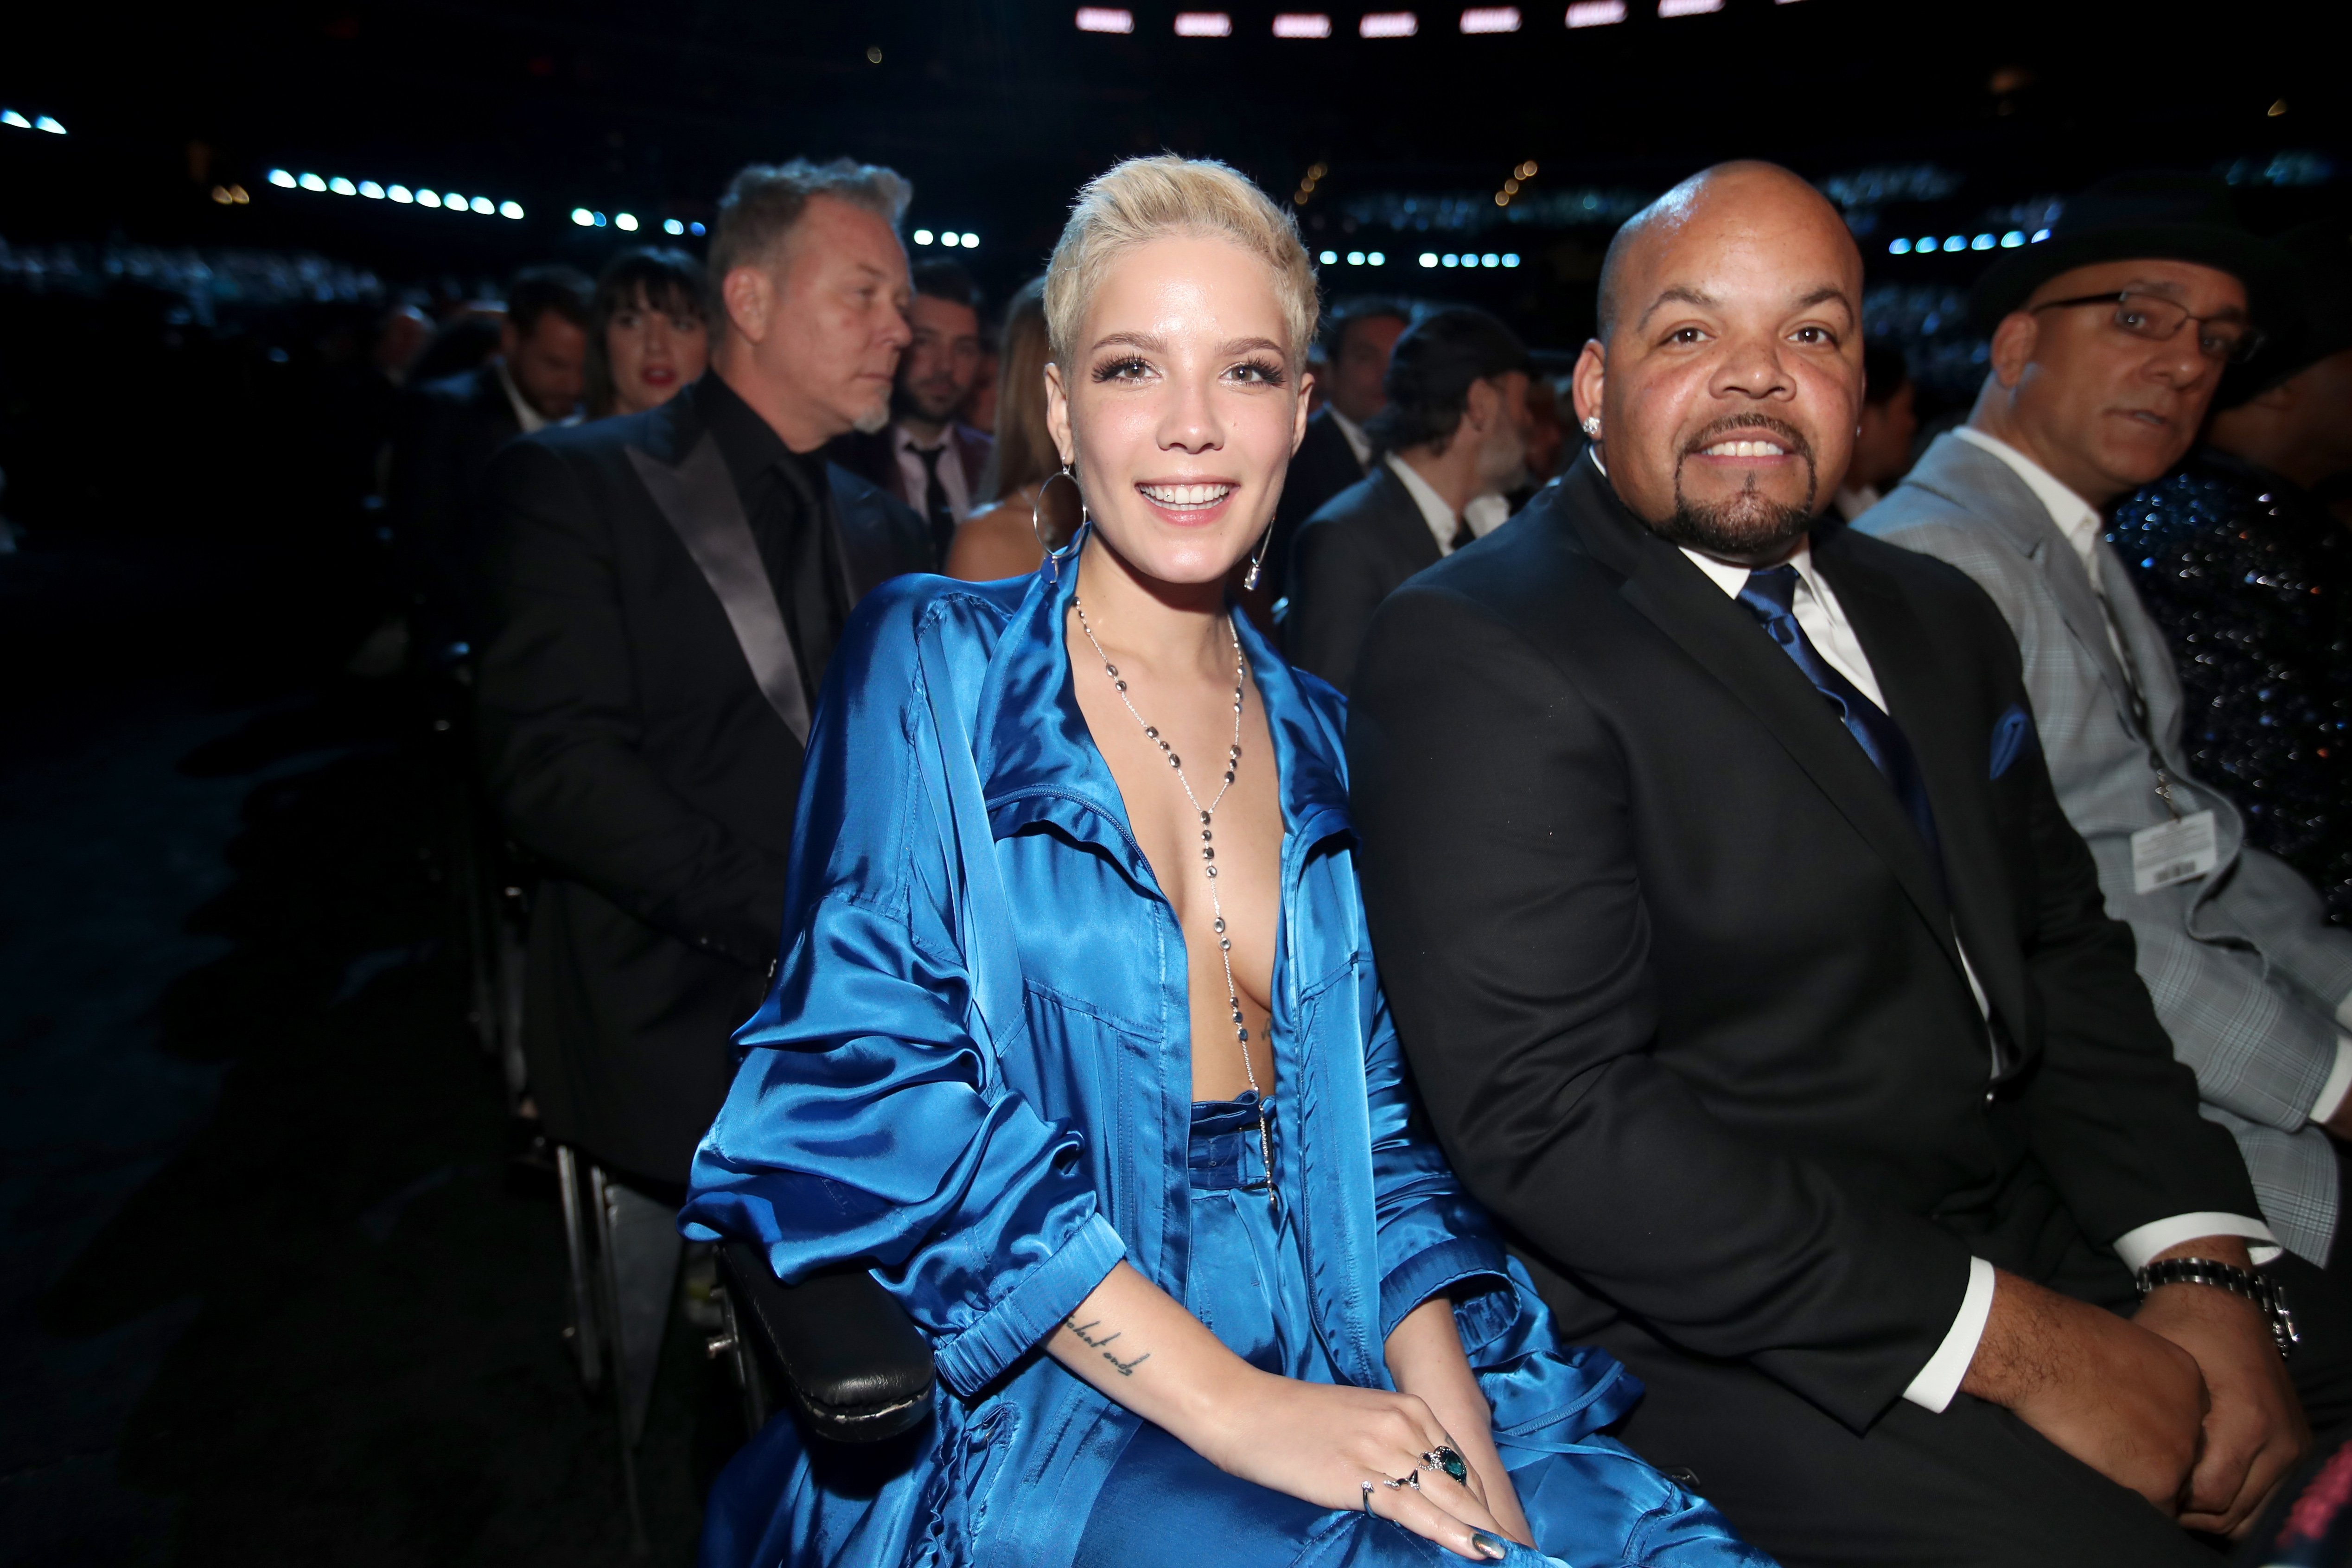 Singer Halsey and her father Chris Frangipane during The 59th GRAMMY Awards at STAPLES Center on February 12, 2017 in Los Angeles, California. | Source: Getty Images